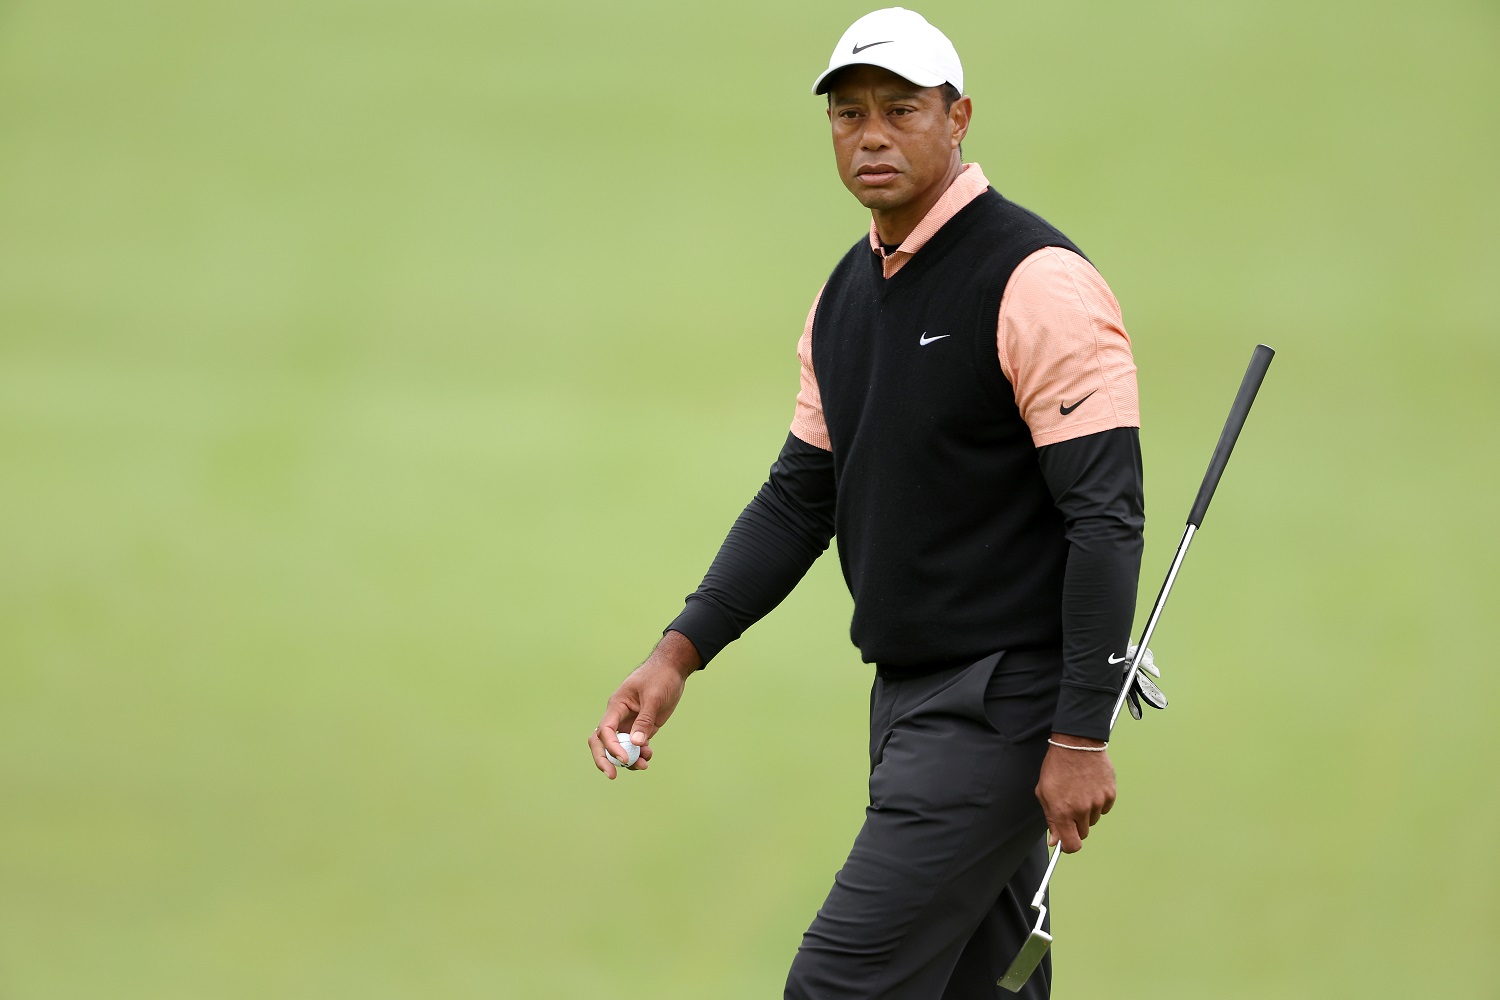 Tiger Woods walks on the 16th hole during the third round of the PGA Championship at Southern Hills Country Club on May 21, 2022 in Tulsa, Oklahoma.